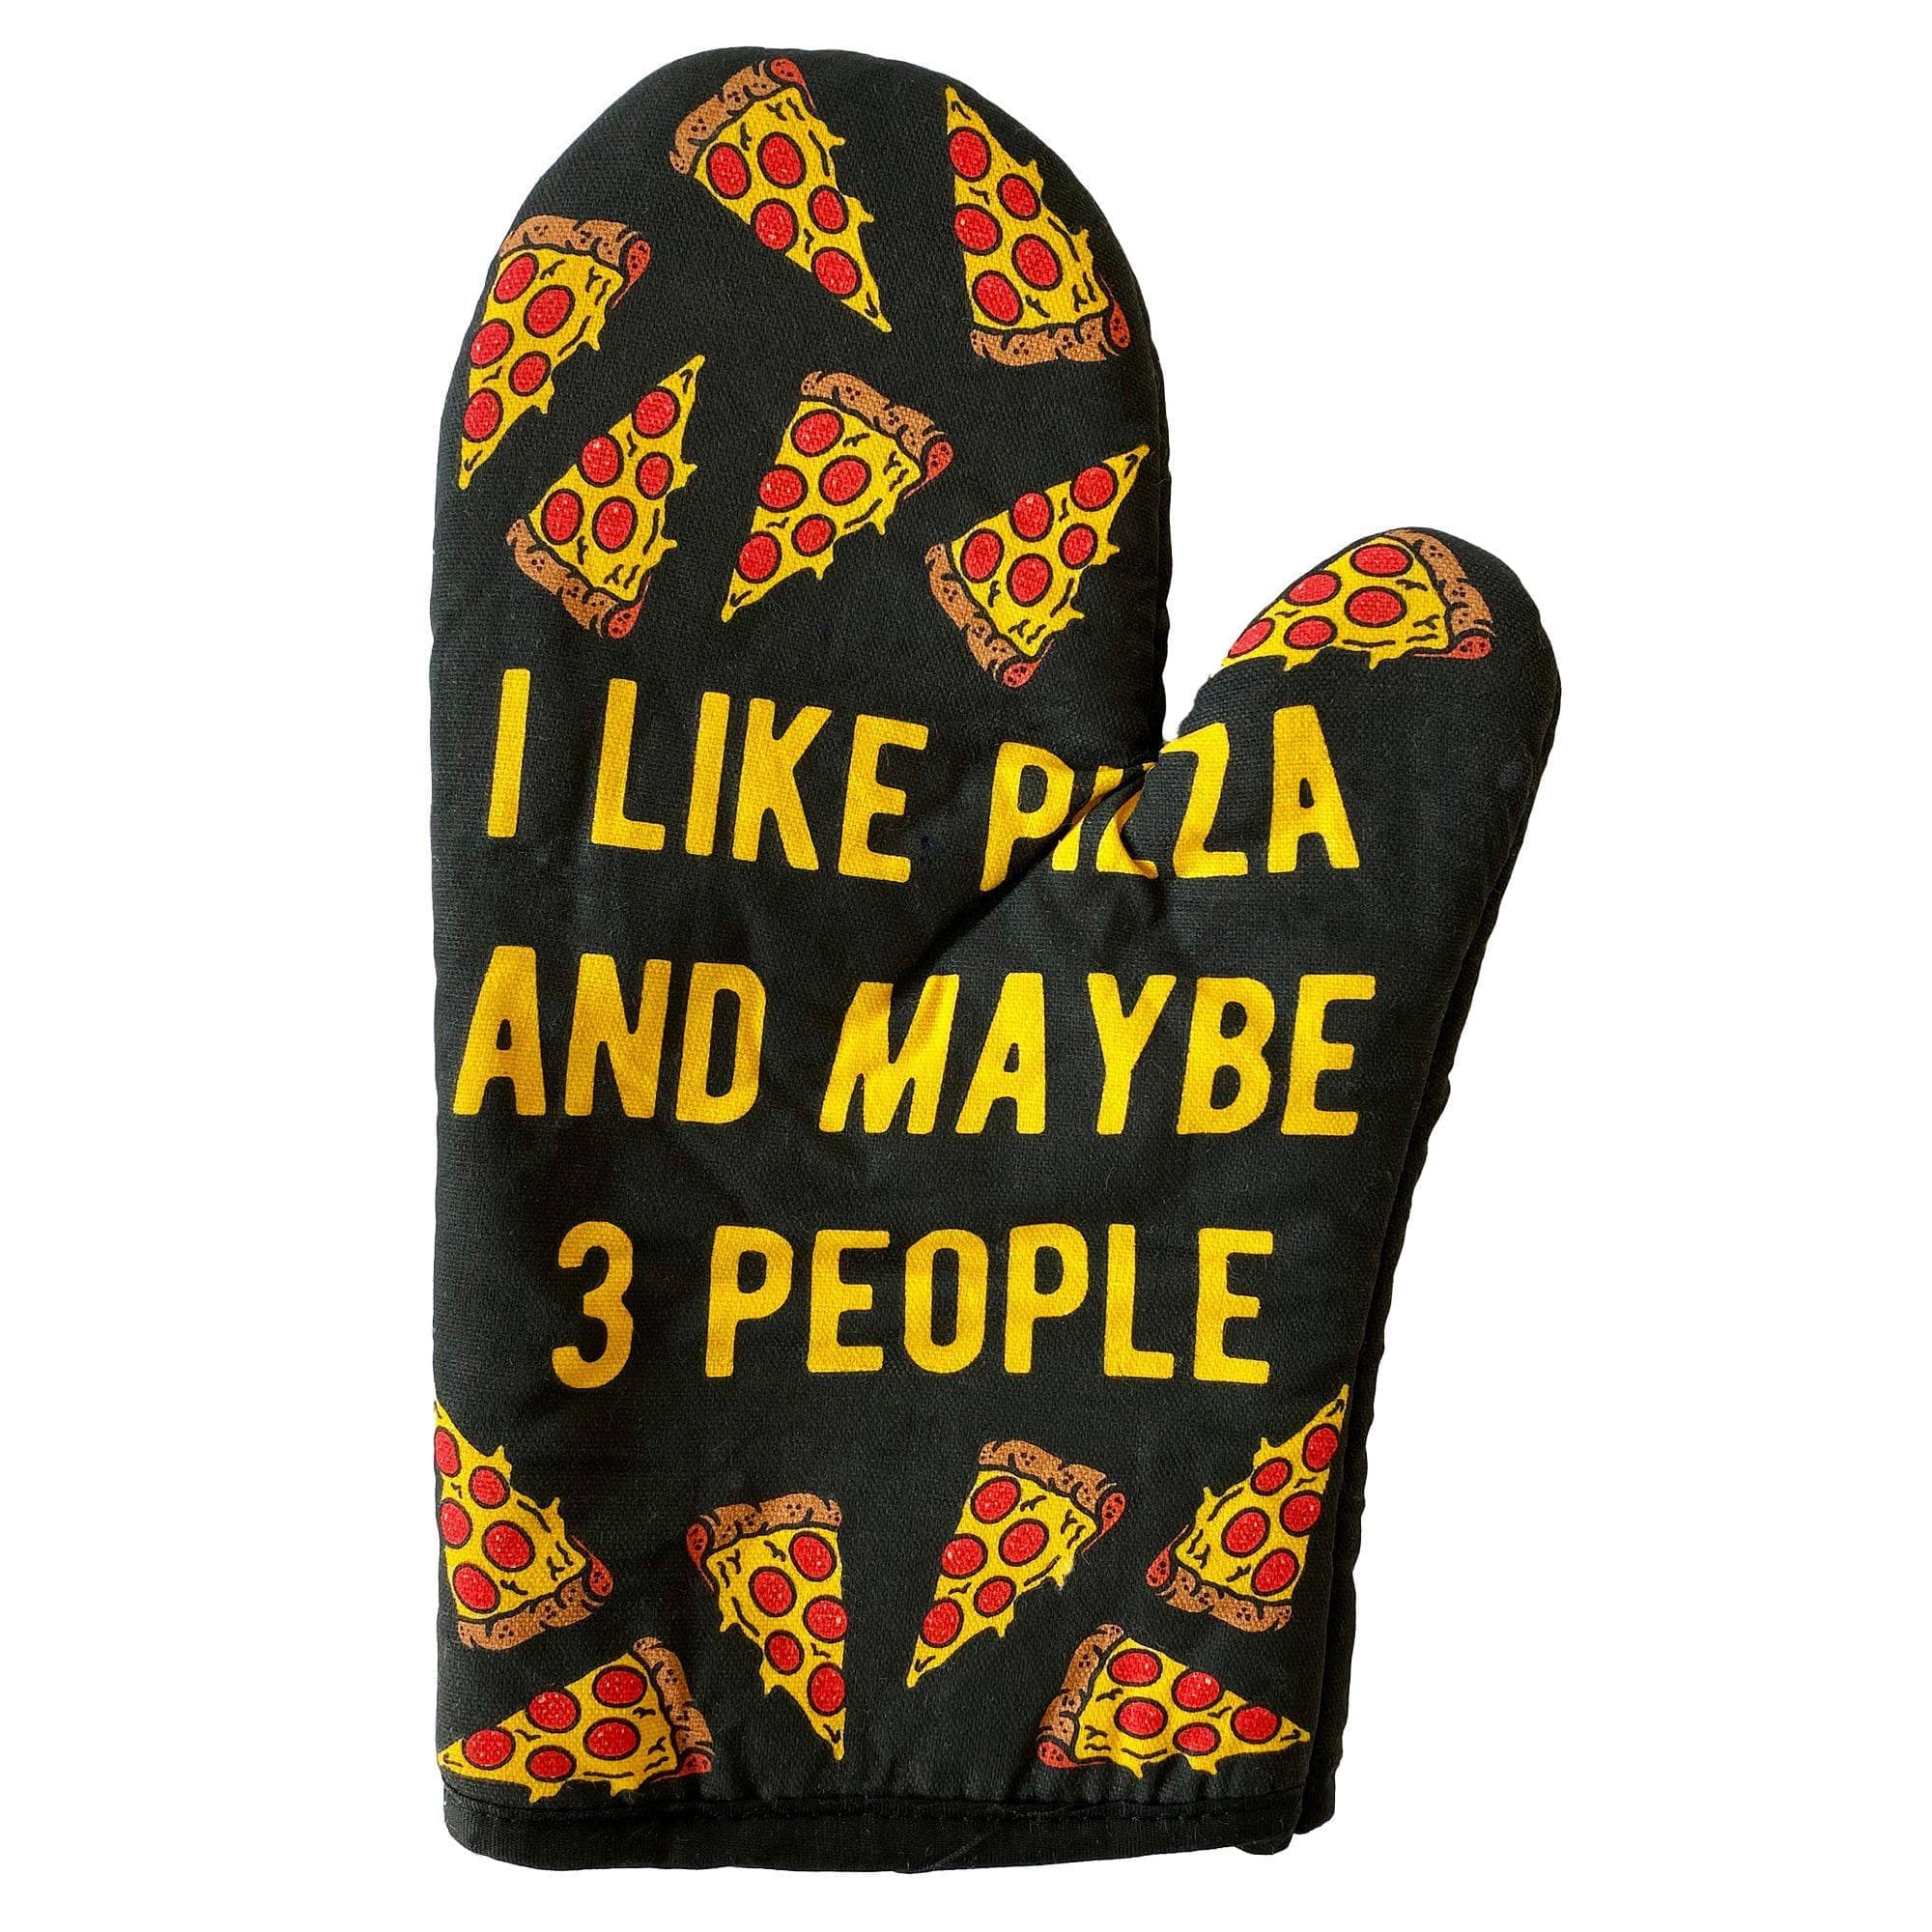 I Like Pizza And Maybe 3 People - Crazy Dog T-Shirts